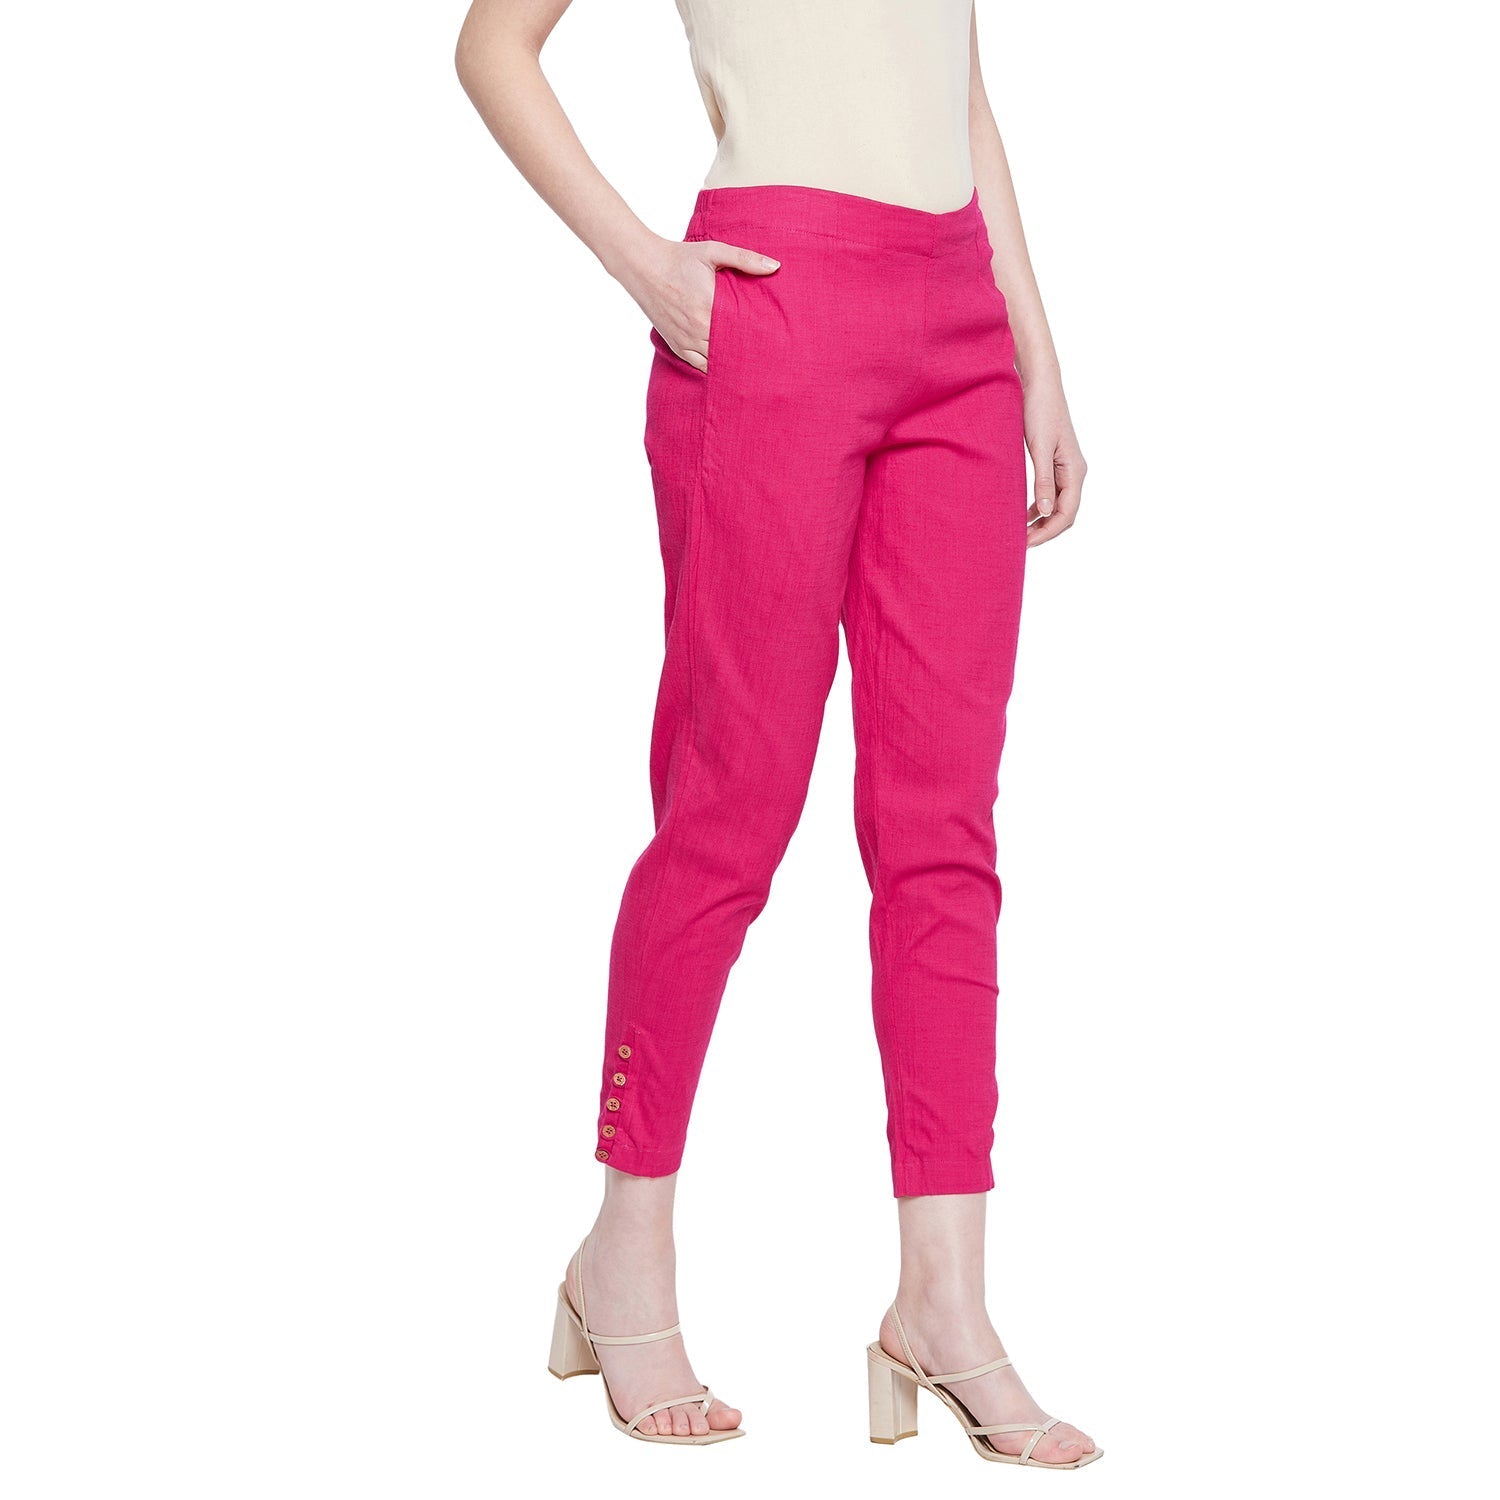 Buy Cherry Leggings Cotton Pencil Pants for Women (Pack of 3) at Amazon.in